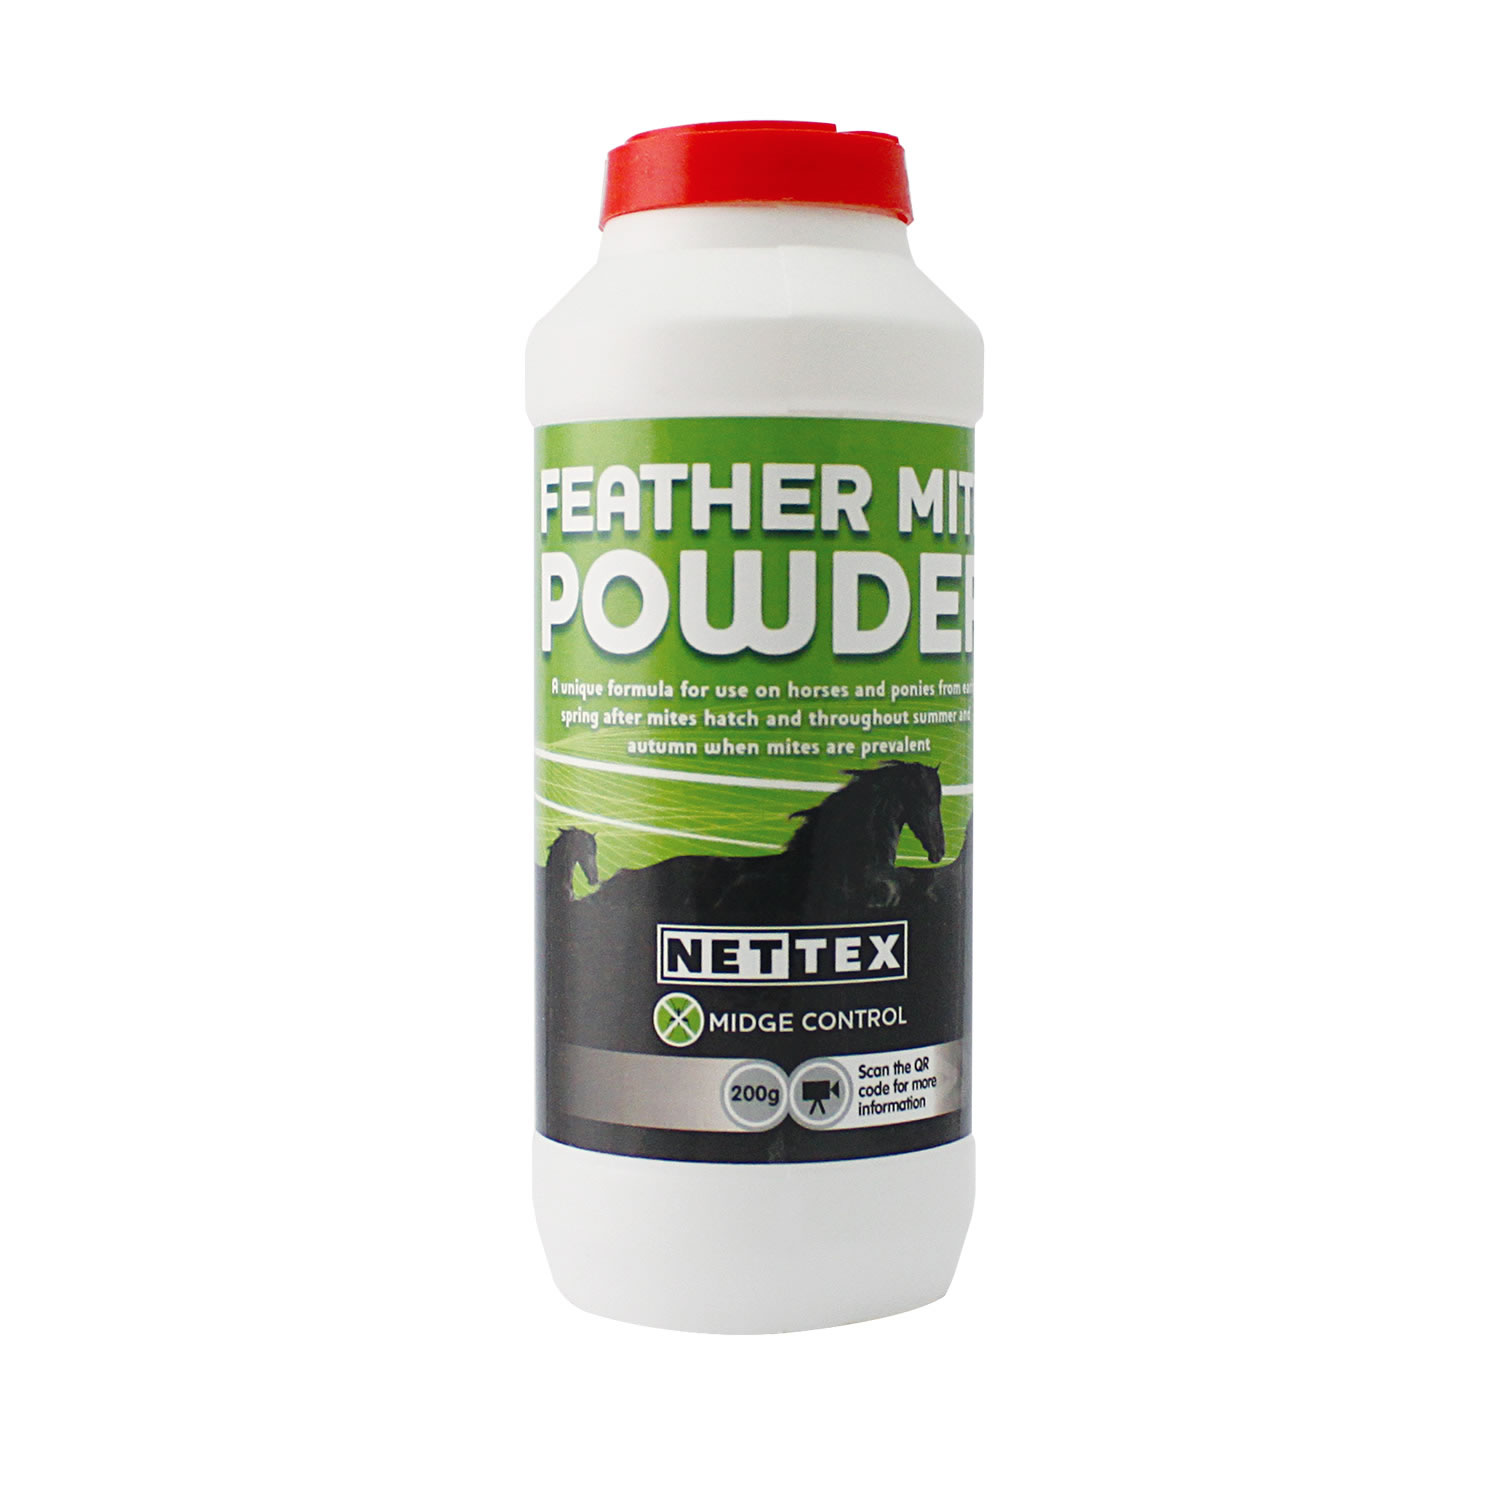 NETTEX FEATHER MITE POWDER 200 GM X 6 PACK 200 GM X 2 PACK